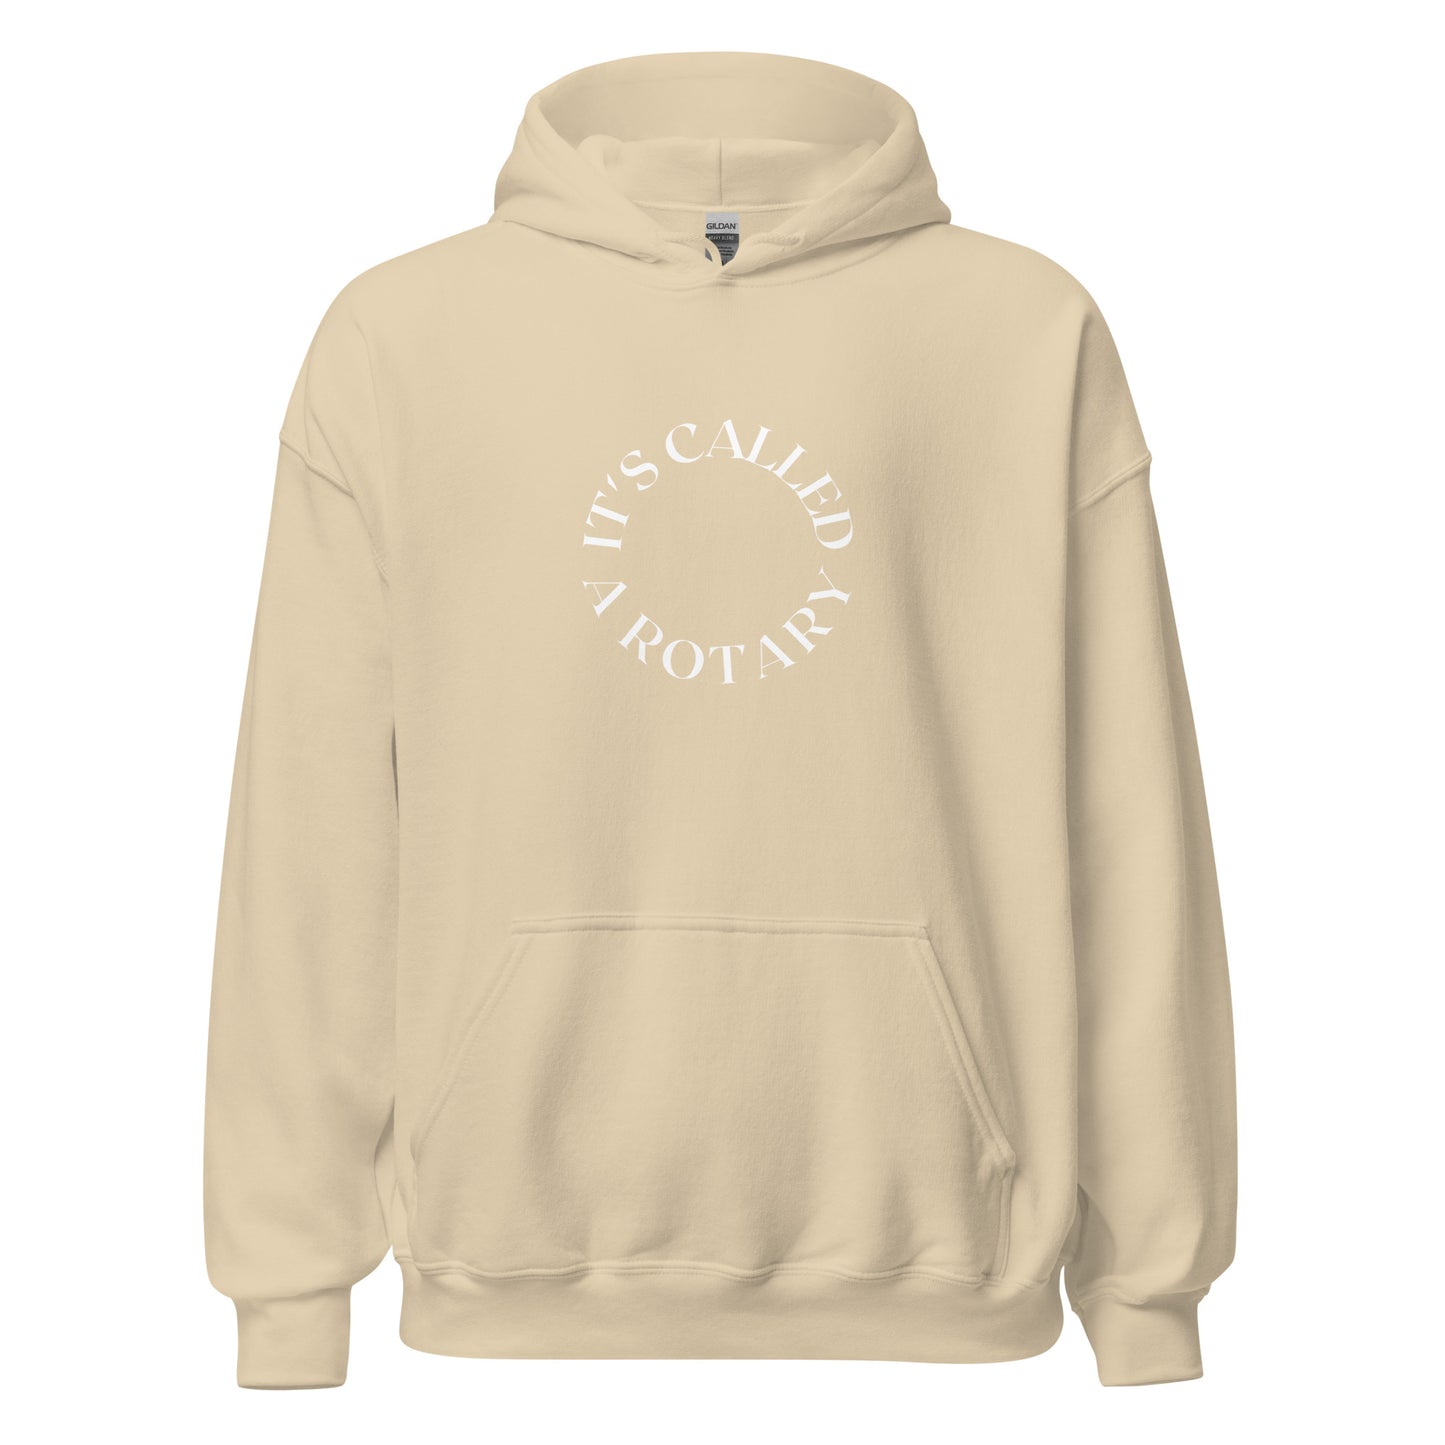 tan hoodie that saying "it's called a rotary" in white lettering shaped in a circle